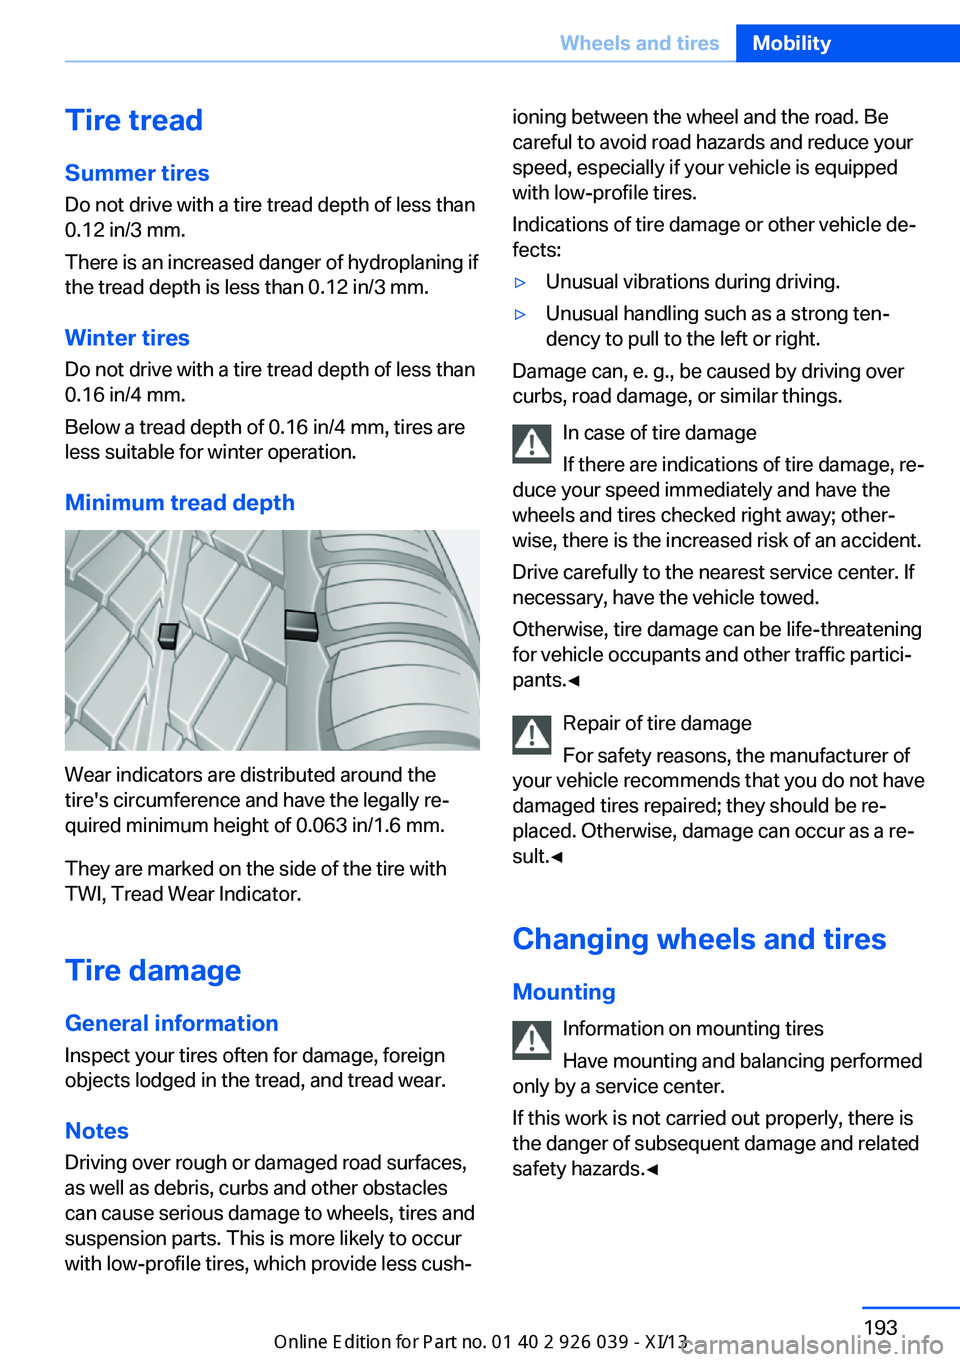 BMW 6 SERIES COUPE 2013 F13 Owners Manual Tire treadSummer tires
Do not drive with a tire tread depth of less than
0.12 in/3 mm.
There is an increased danger of hydroplaning if
the tread depth is less than 0.12 in/3 mm.
Winter tires Do not dr